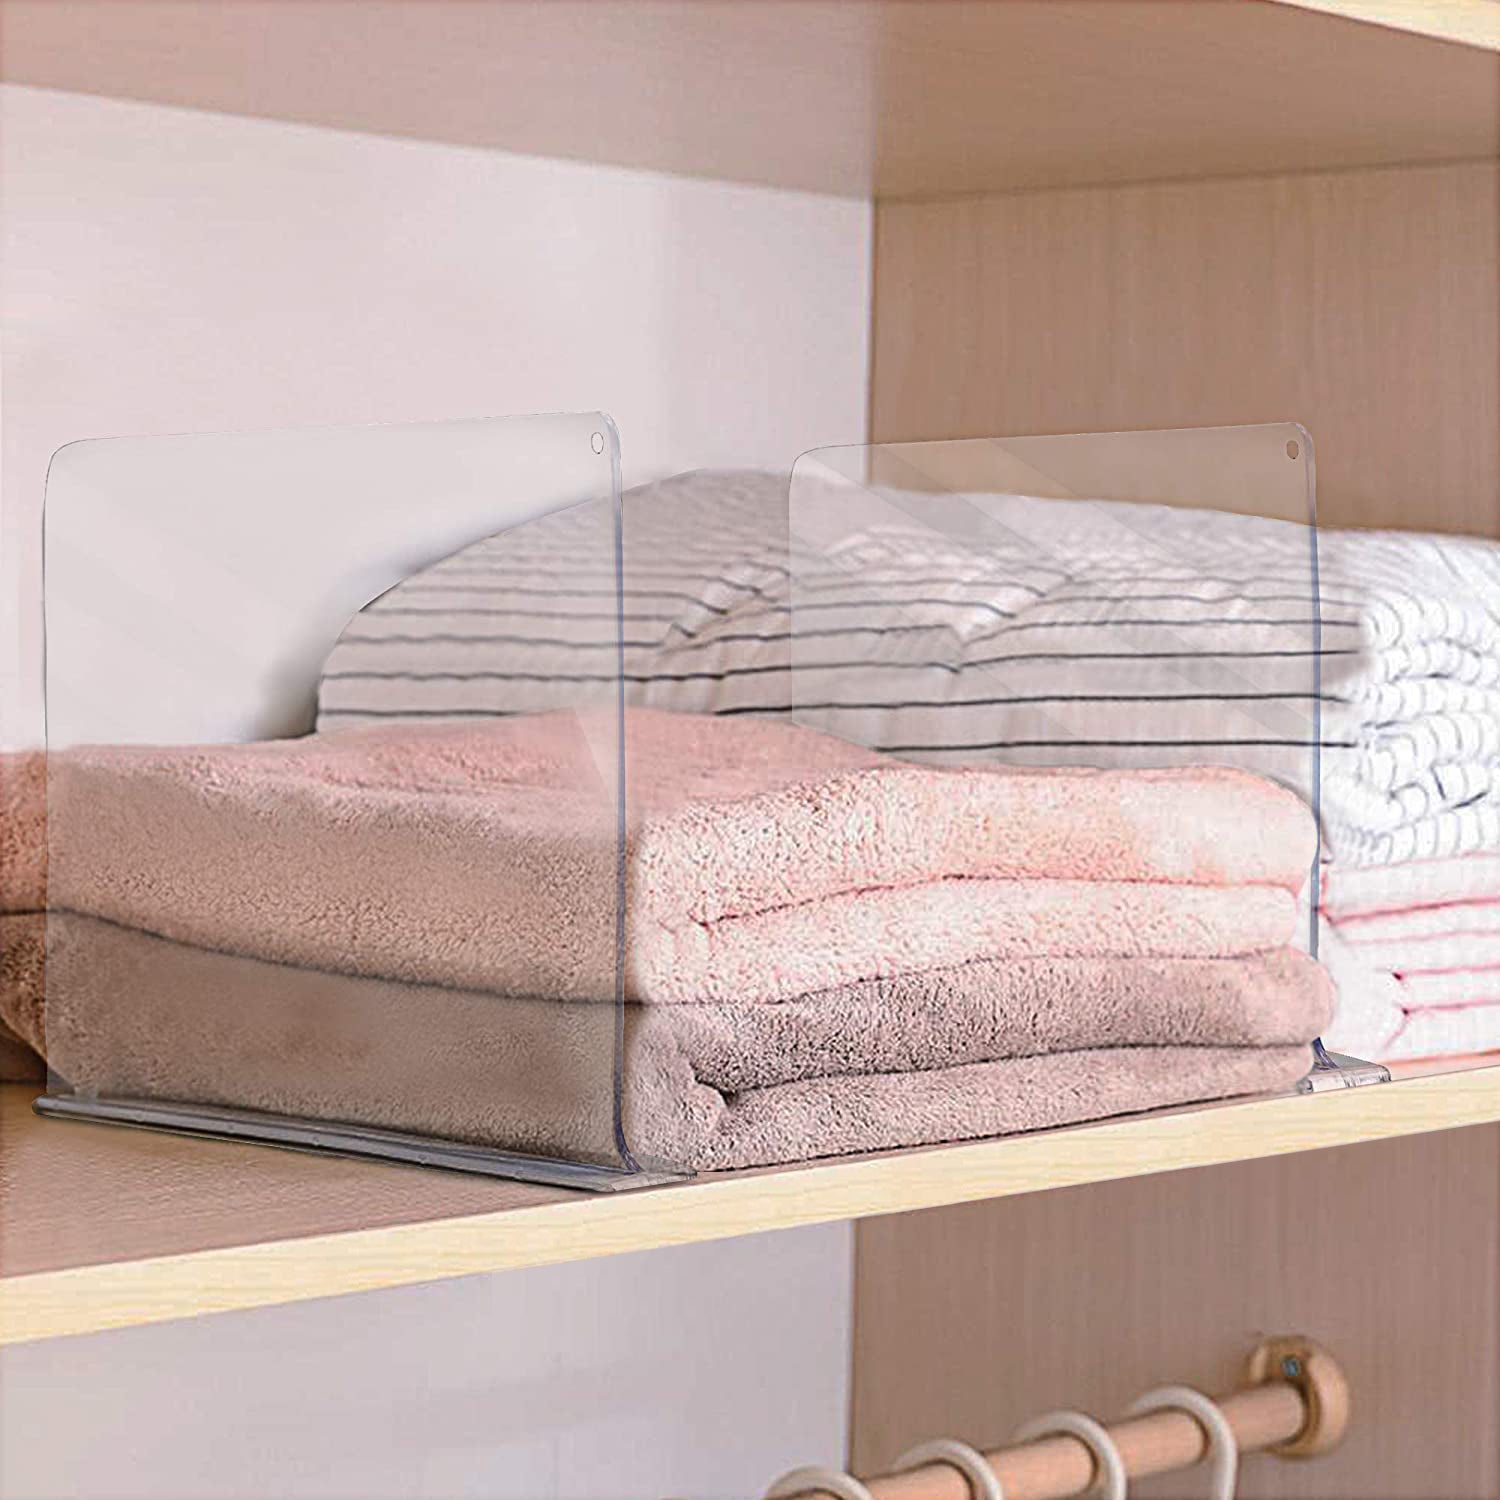 Sorbus Acrylic Shelf Divider With Adhesive Tape for Closet Organization, Clothes, etc